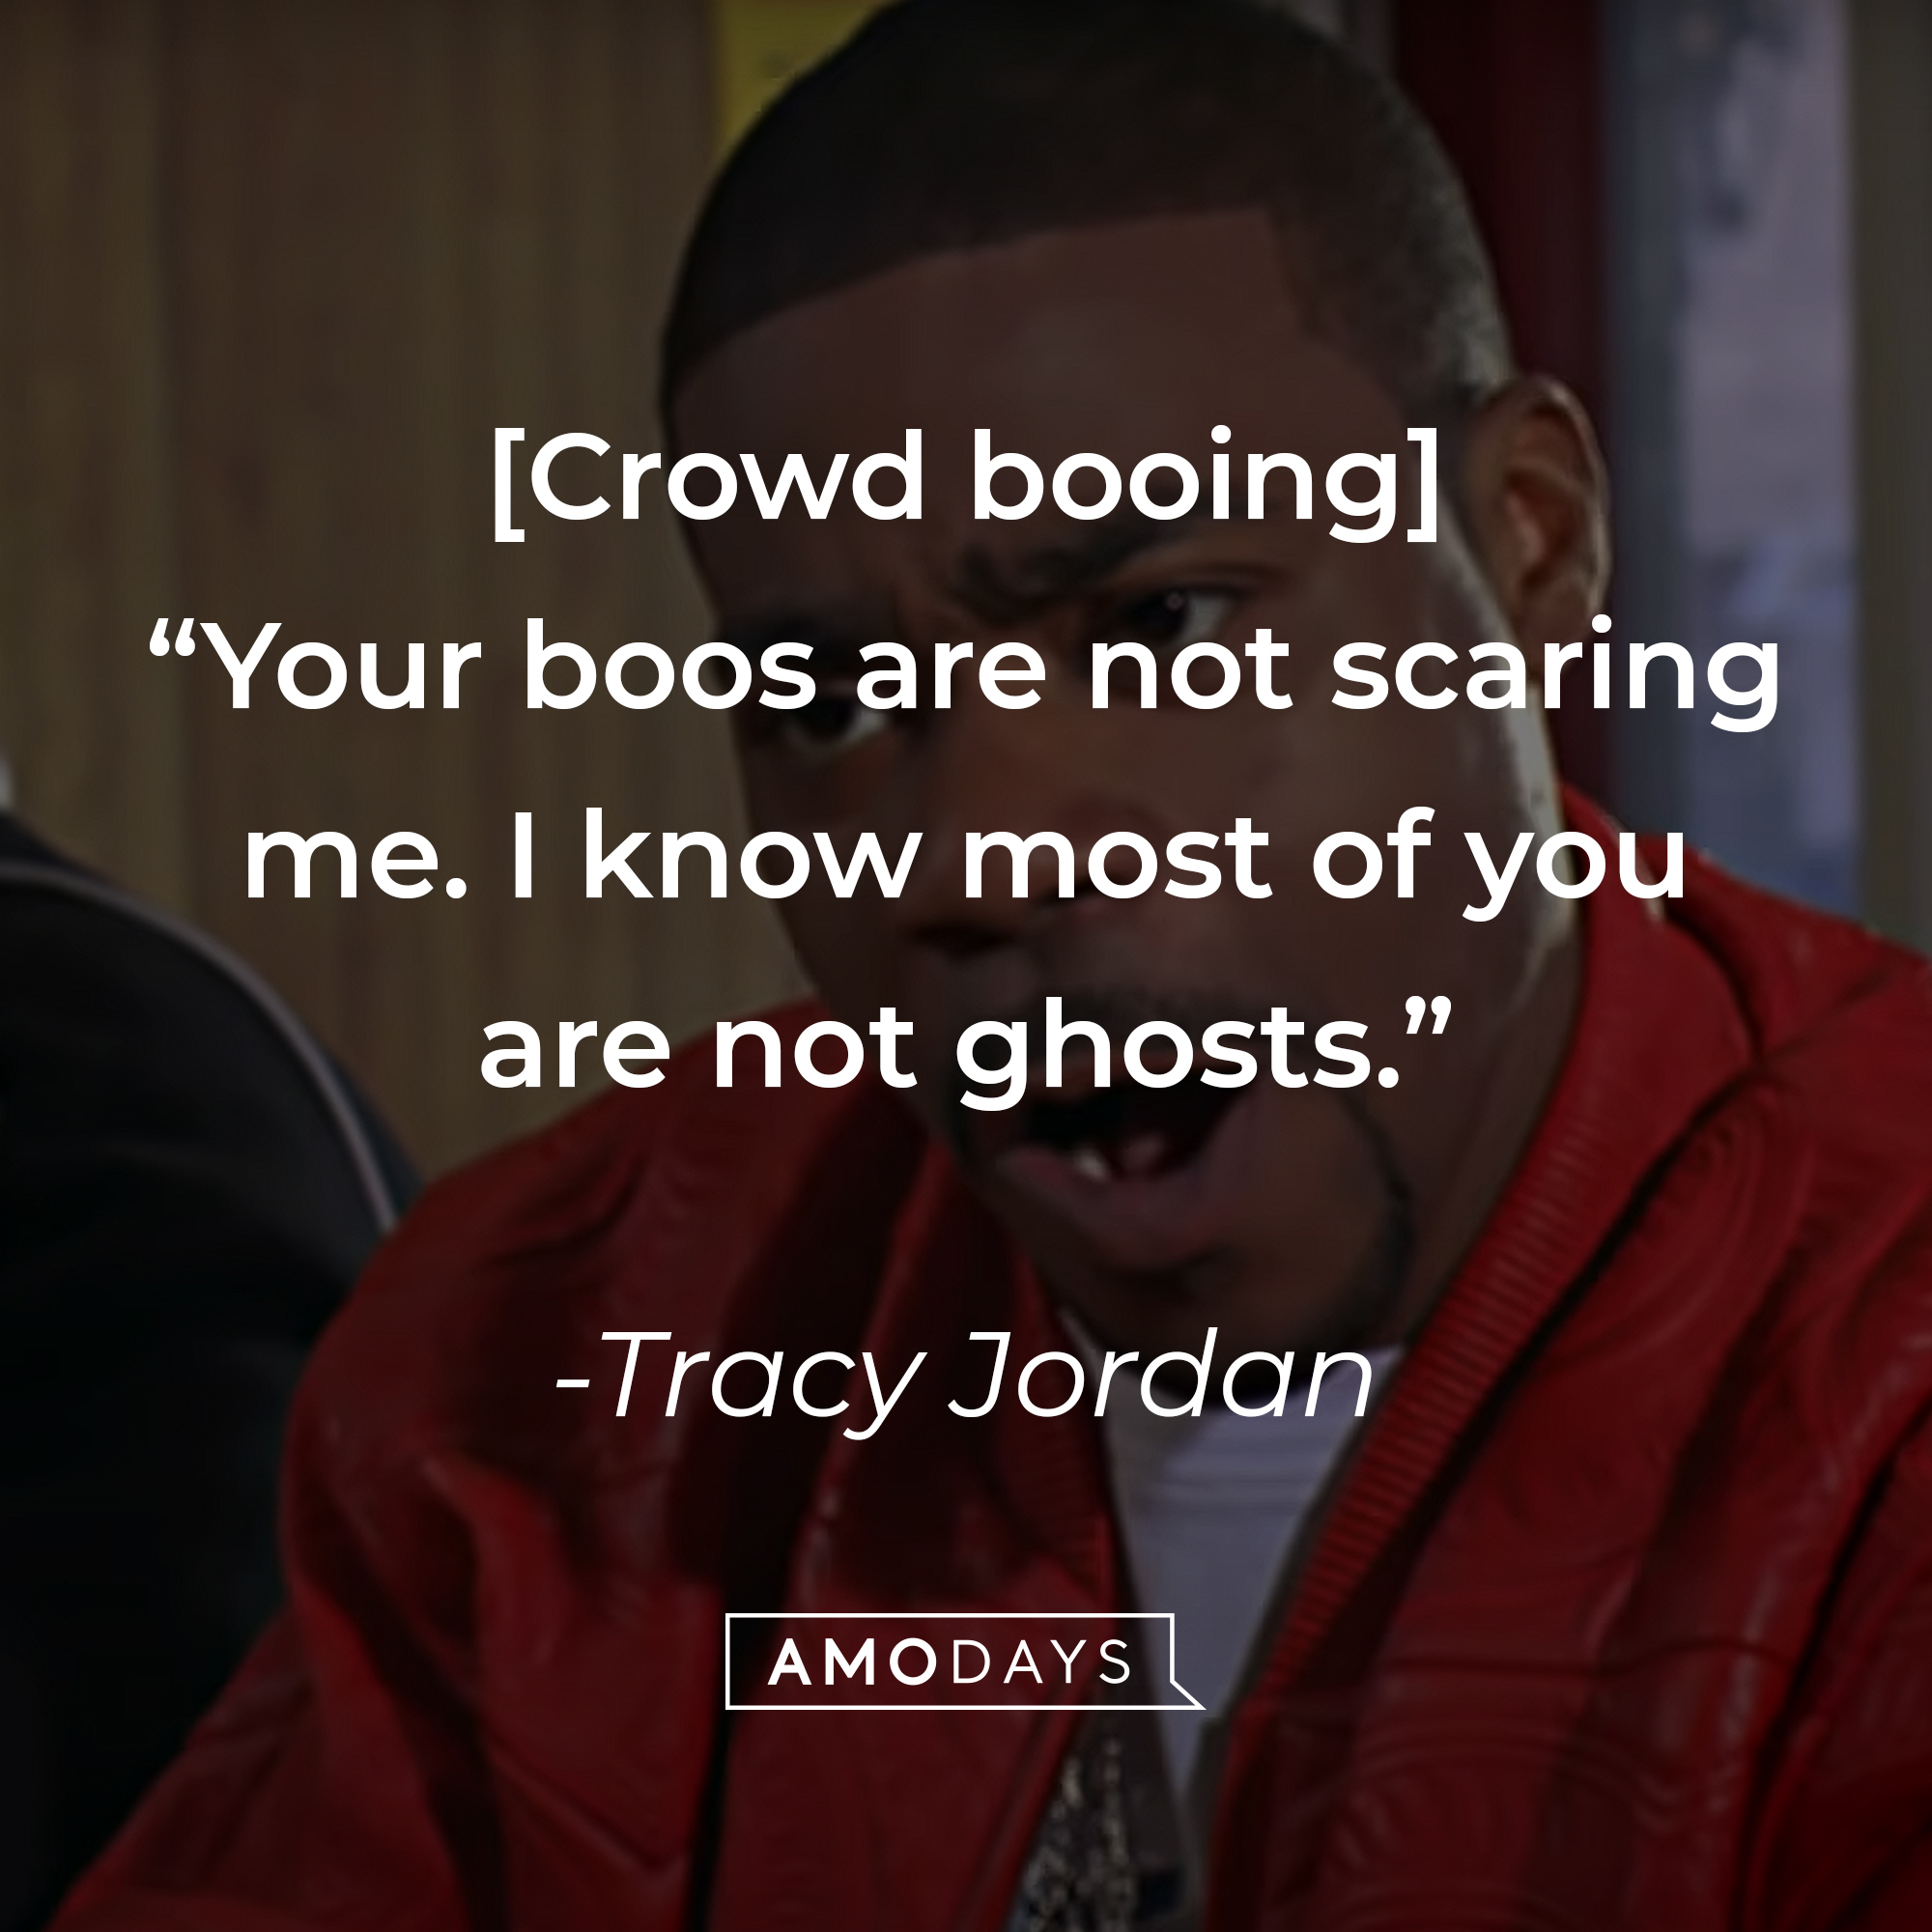 Tracy Jordan's quote, "[Crowd booing] Your boos are not scaring me. I know most of you are not ghosts." | Source: facebook.com/30RockTV